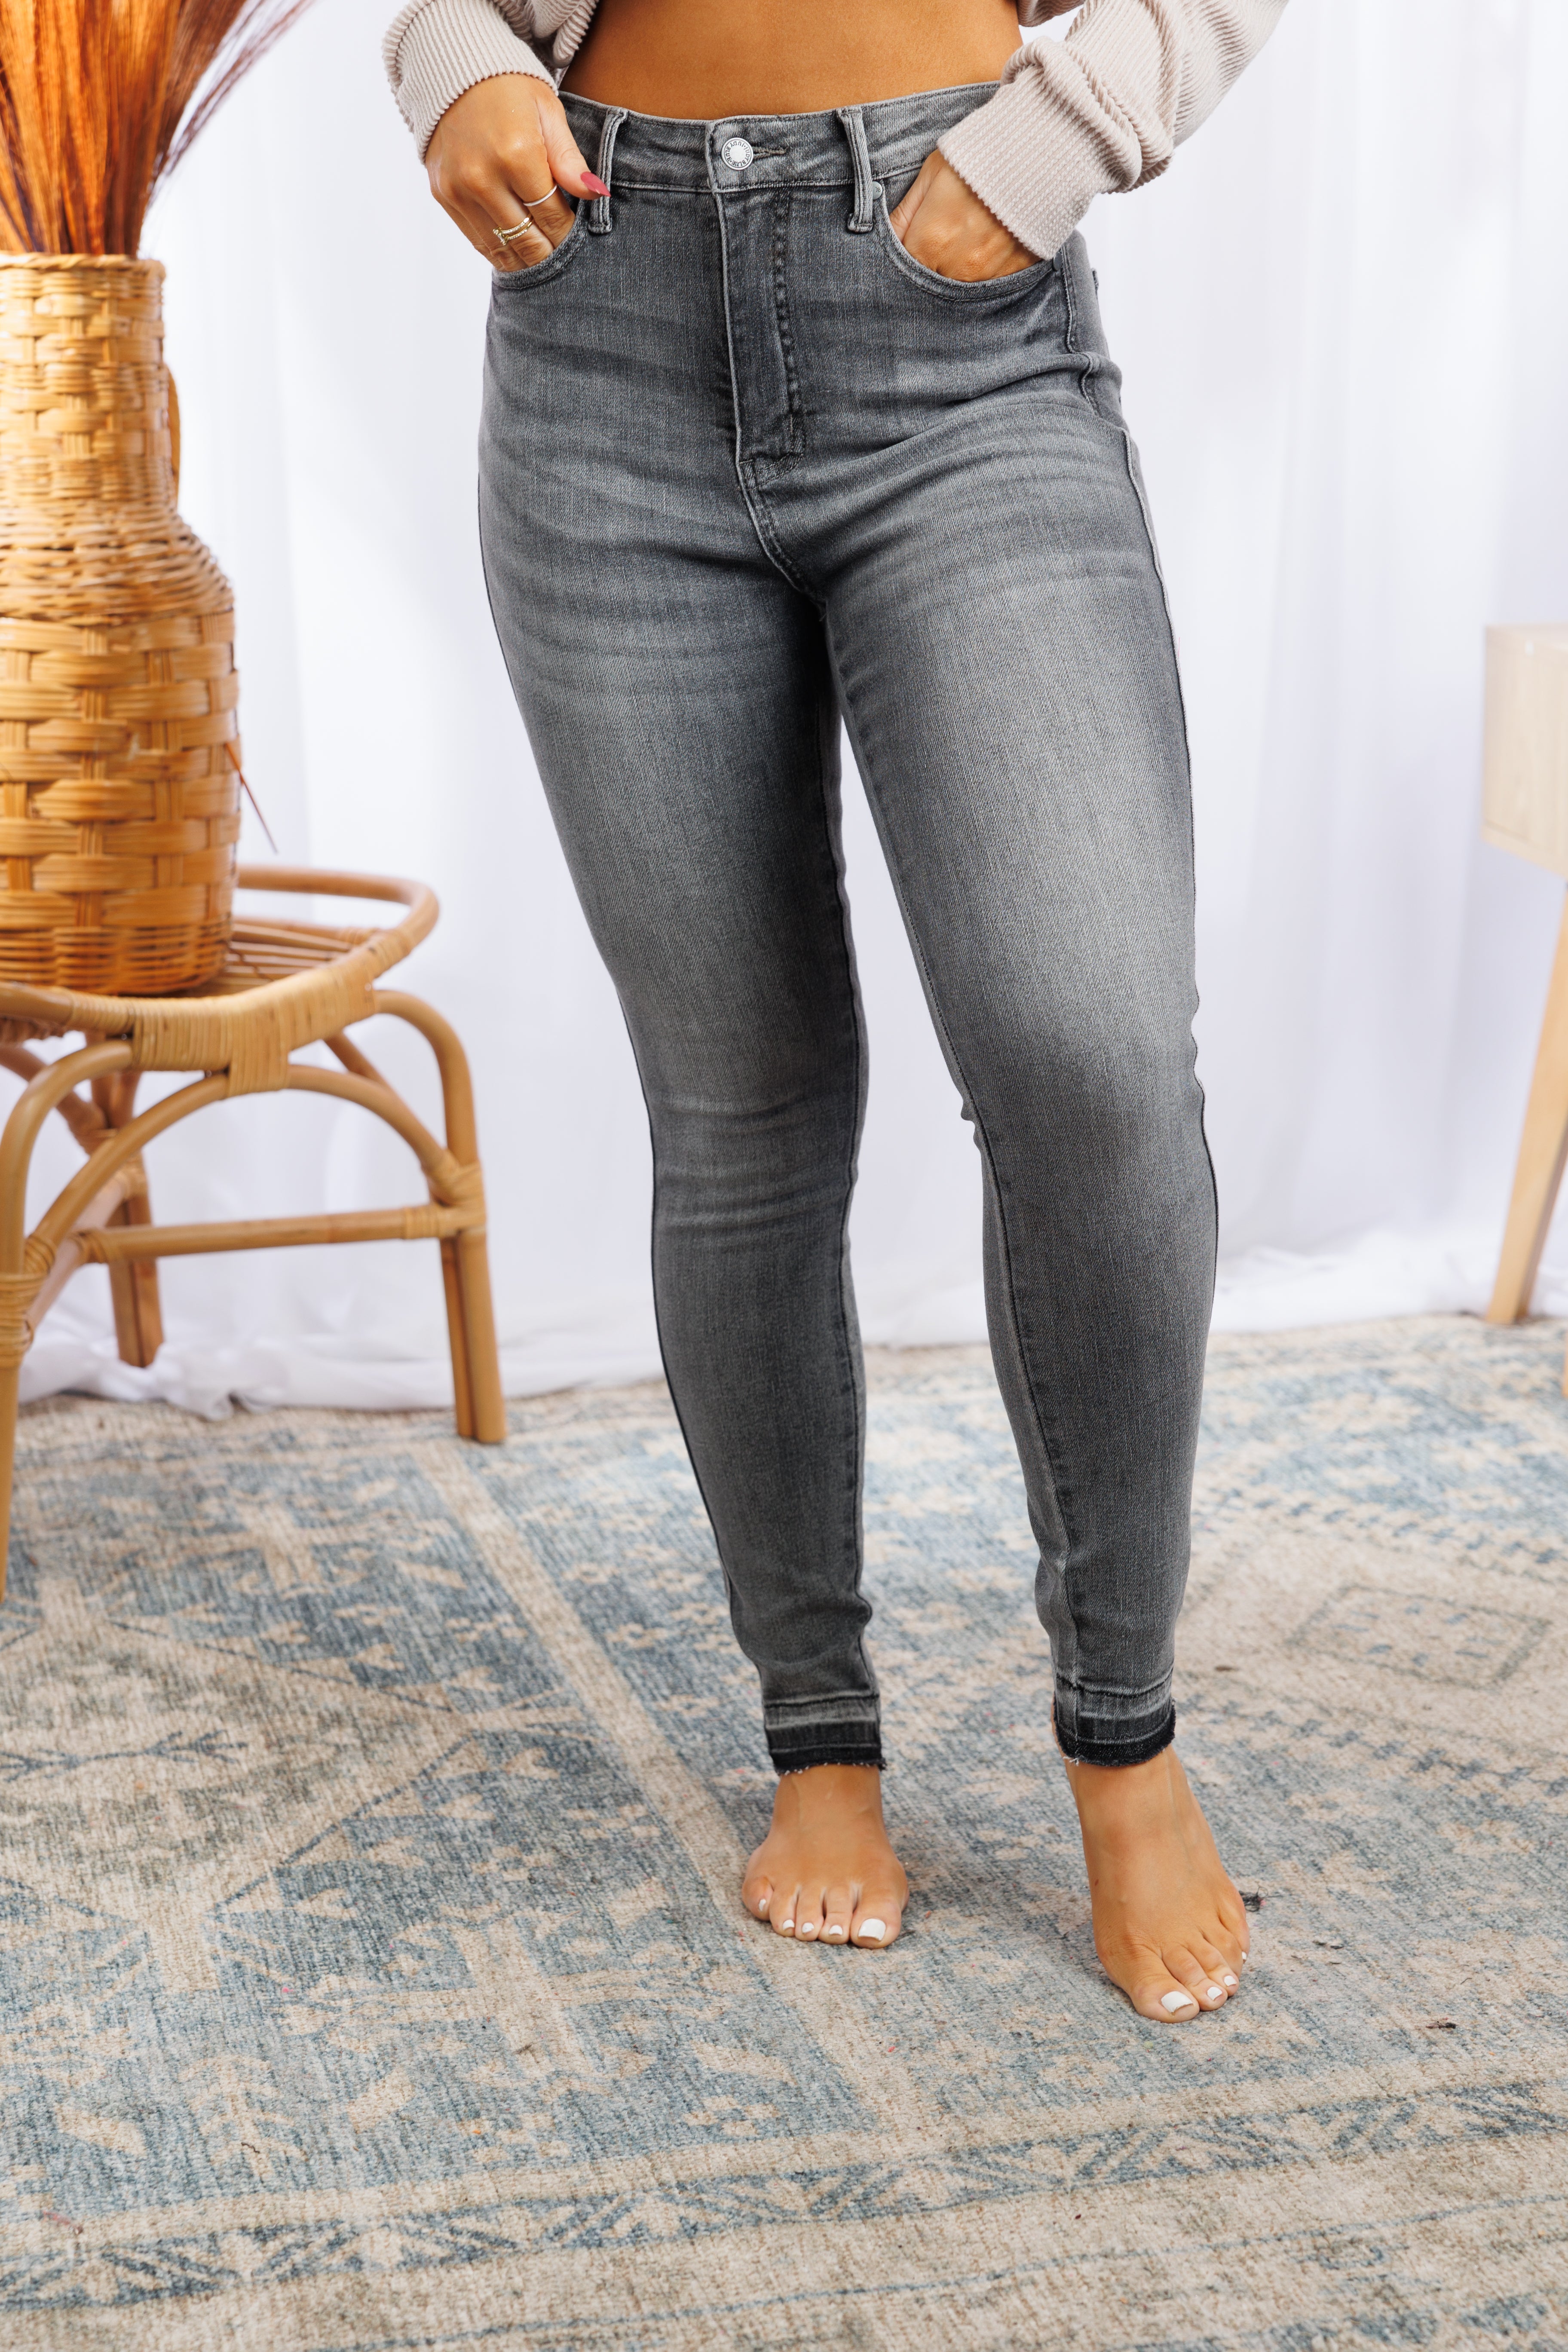 A person wearing JB Boutique Simplified's Total Control - Tummy Control Jeans with a beige top stands barefoot on a patterned rug. The surroundings include a wicker basket with dried plants and a wooden chair, all set against a backdrop of sheer white curtains. The photo focuses on the lower body.